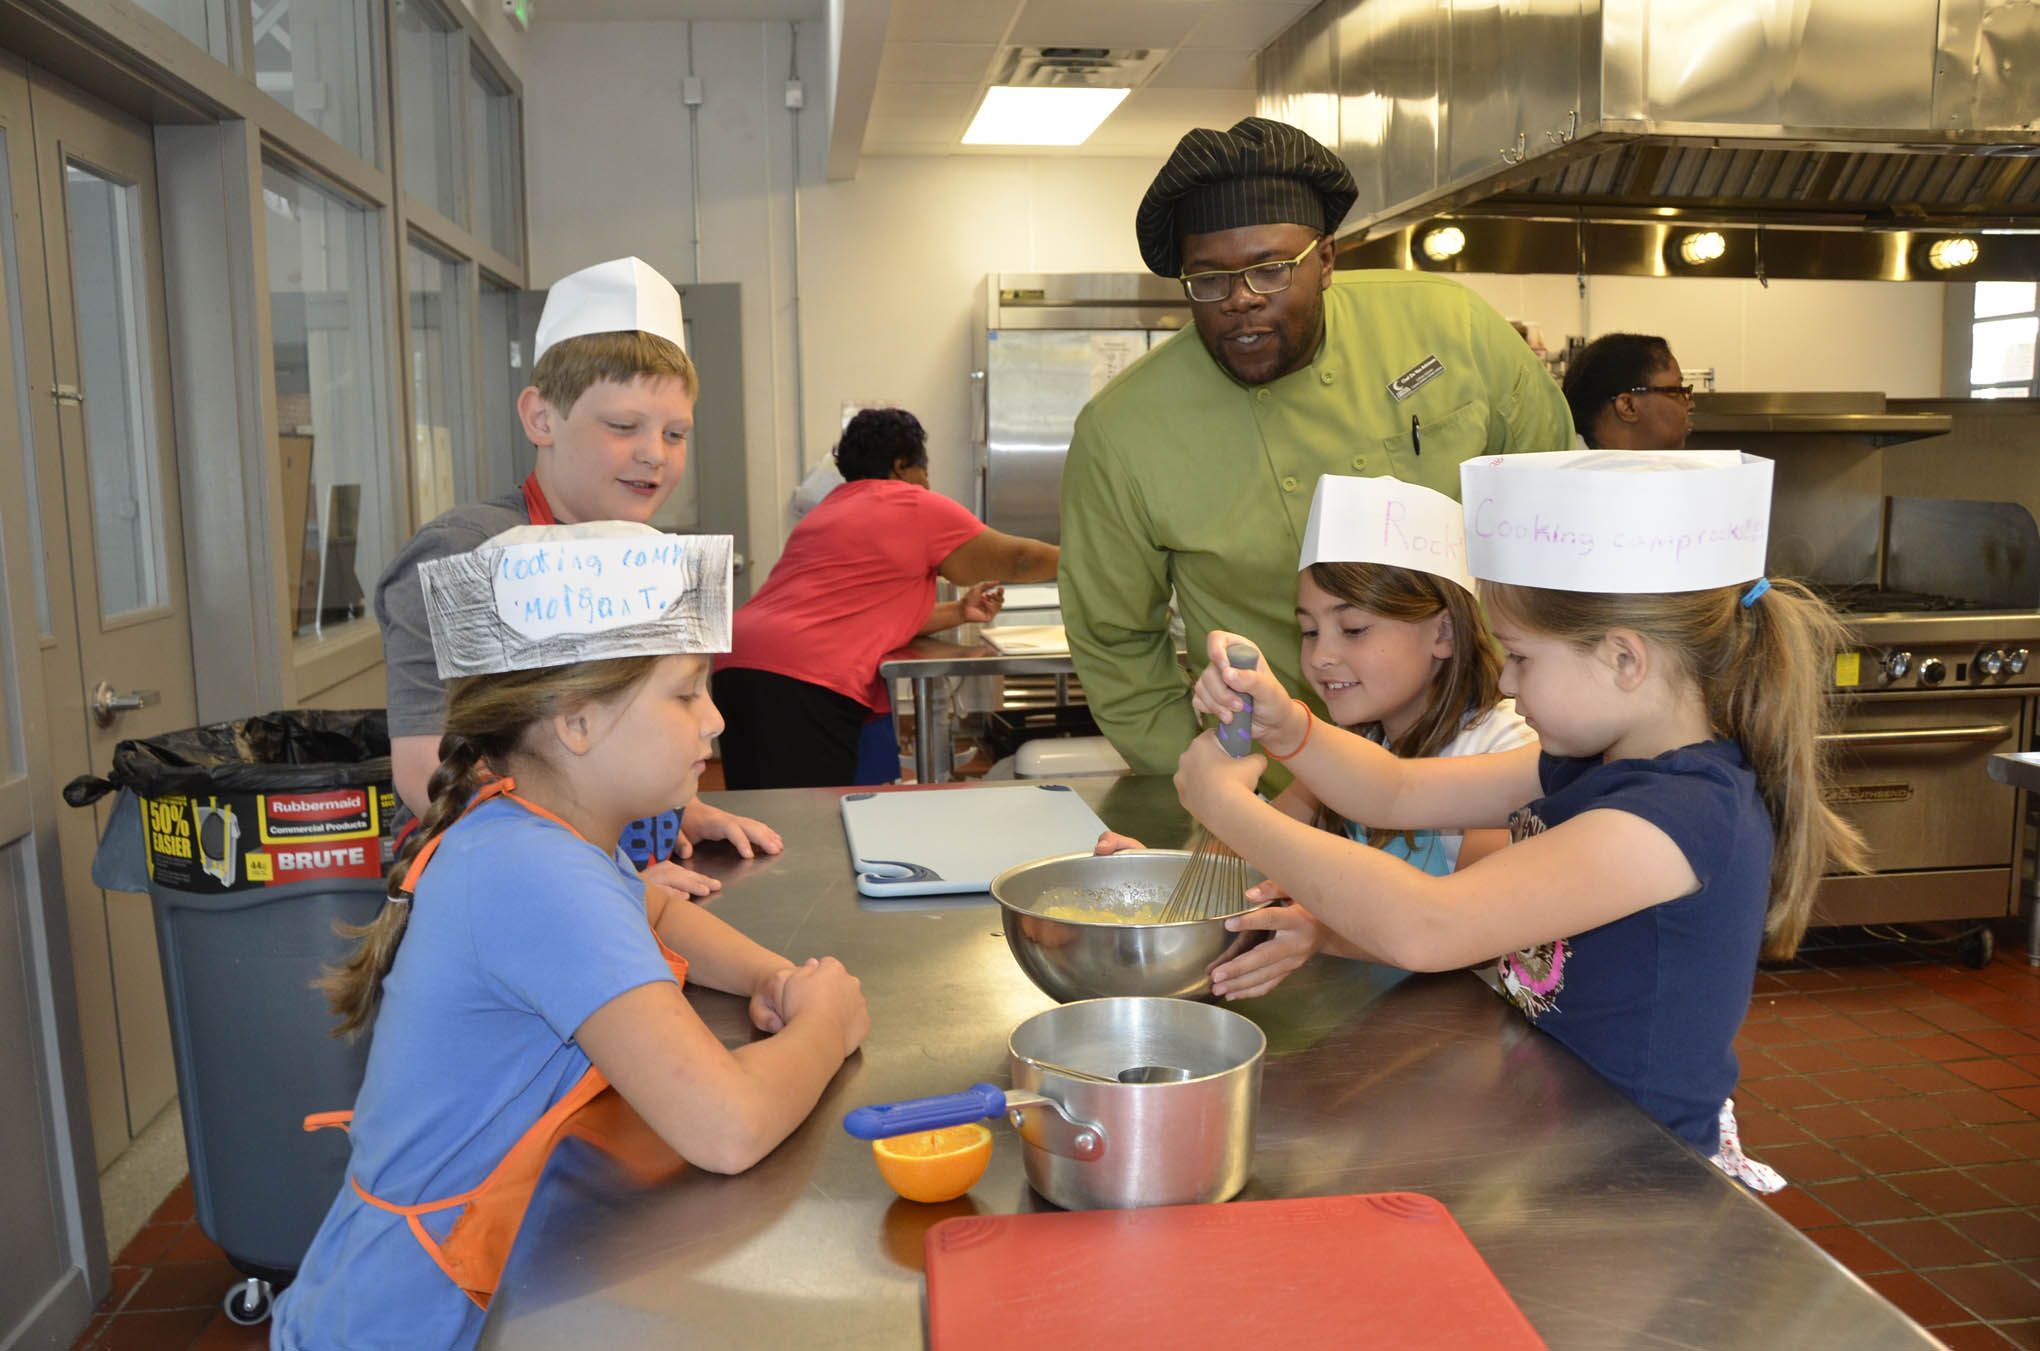 CCCC cooking camps allow kids to create